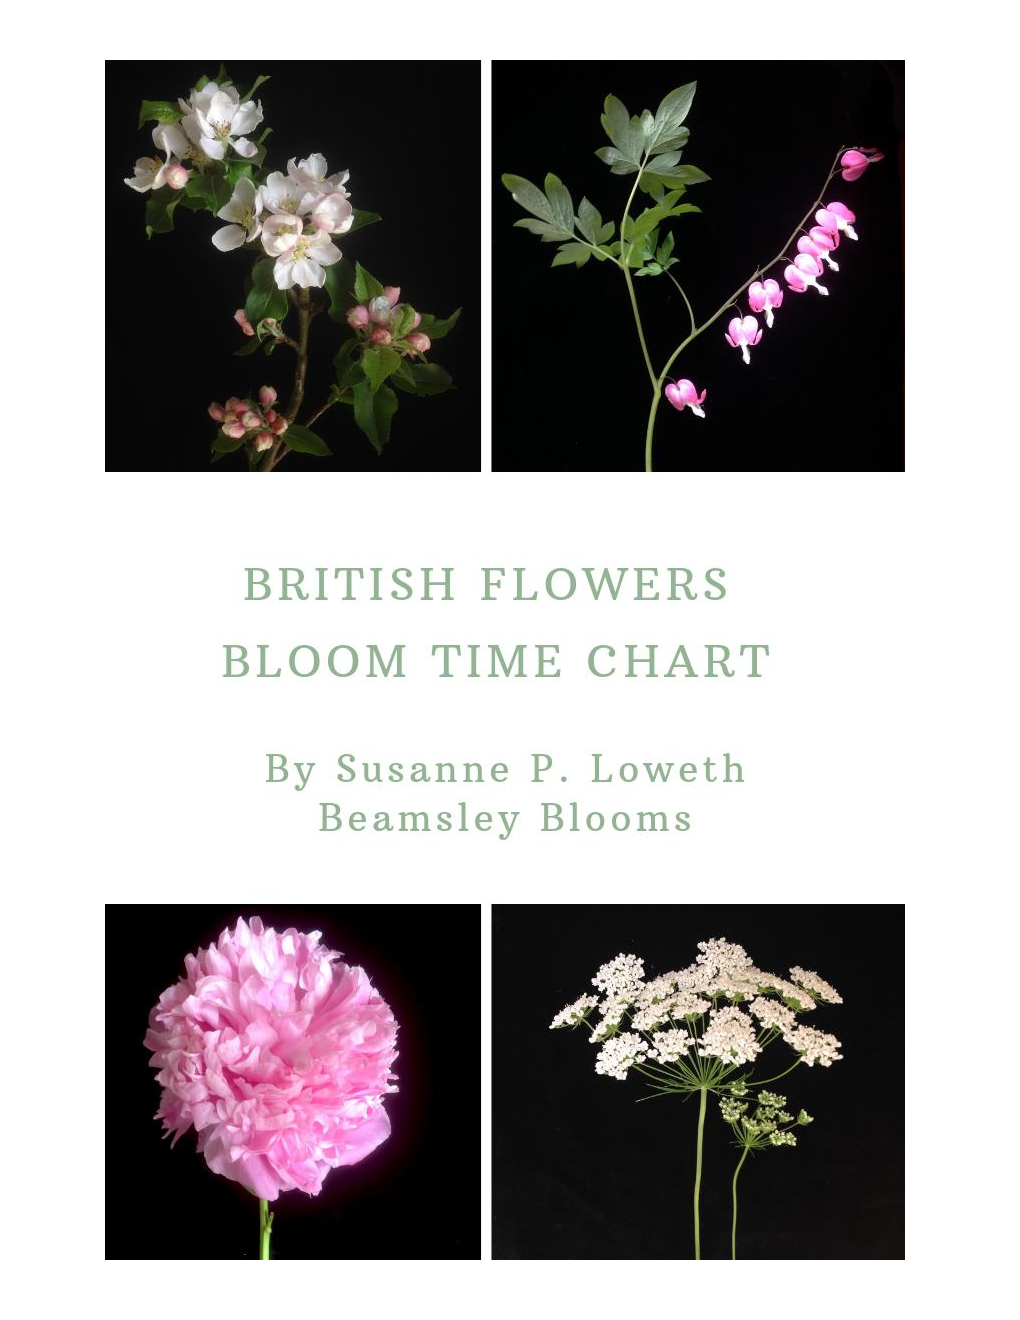 Download the British Flowers Bloom Time Chart